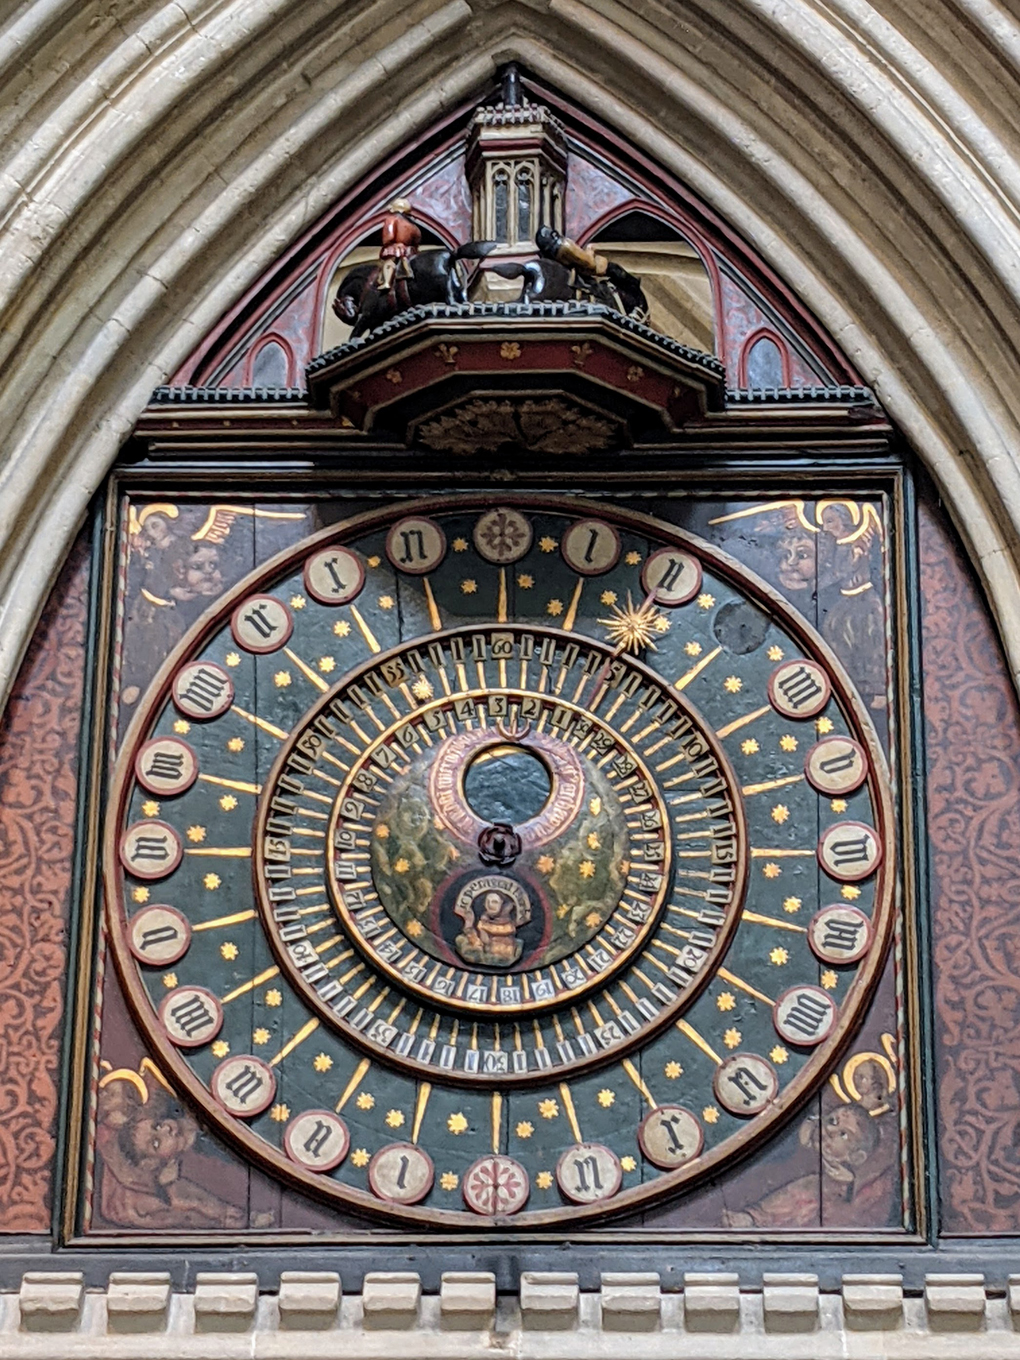 The clock in Wells Cathedral.